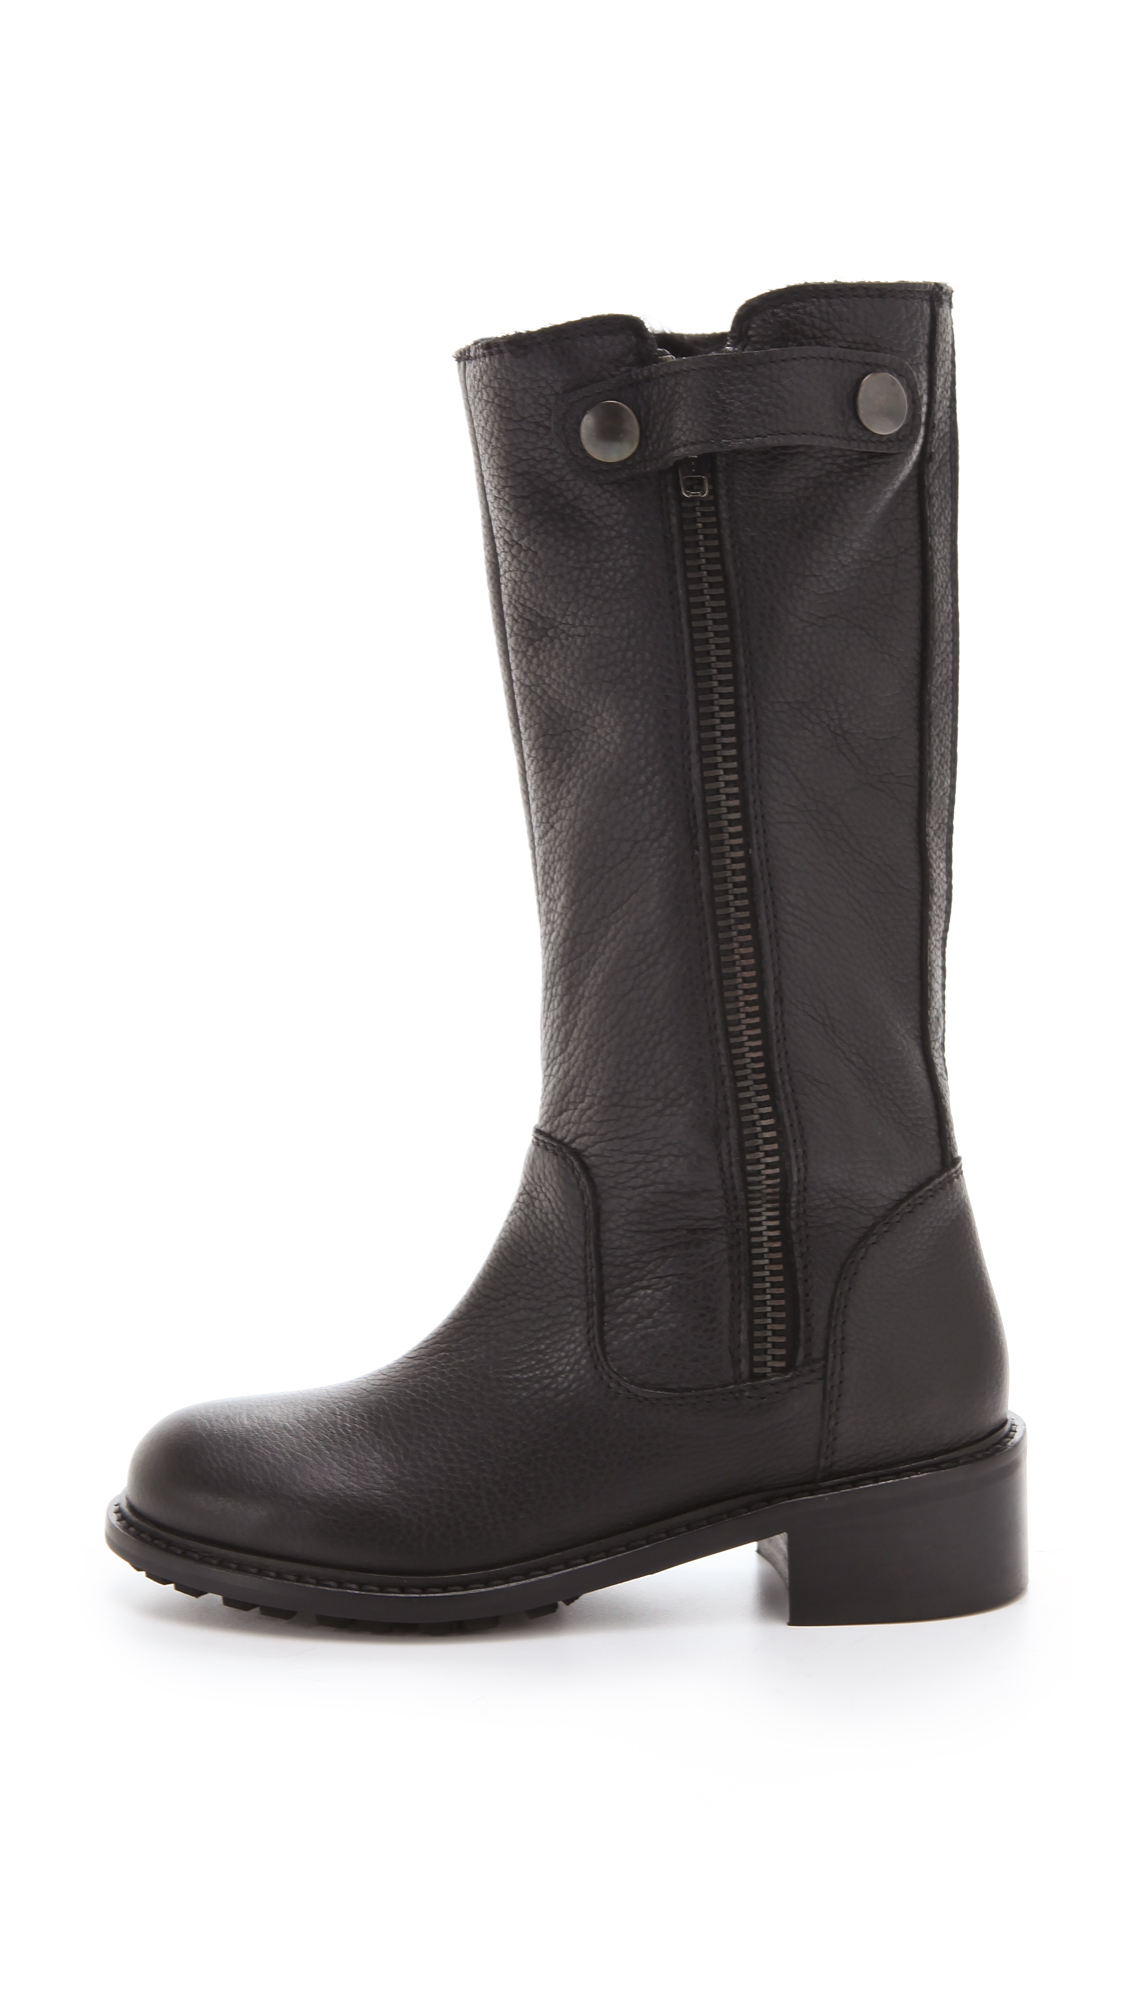 Lyst - Vince Justine Boots in Black